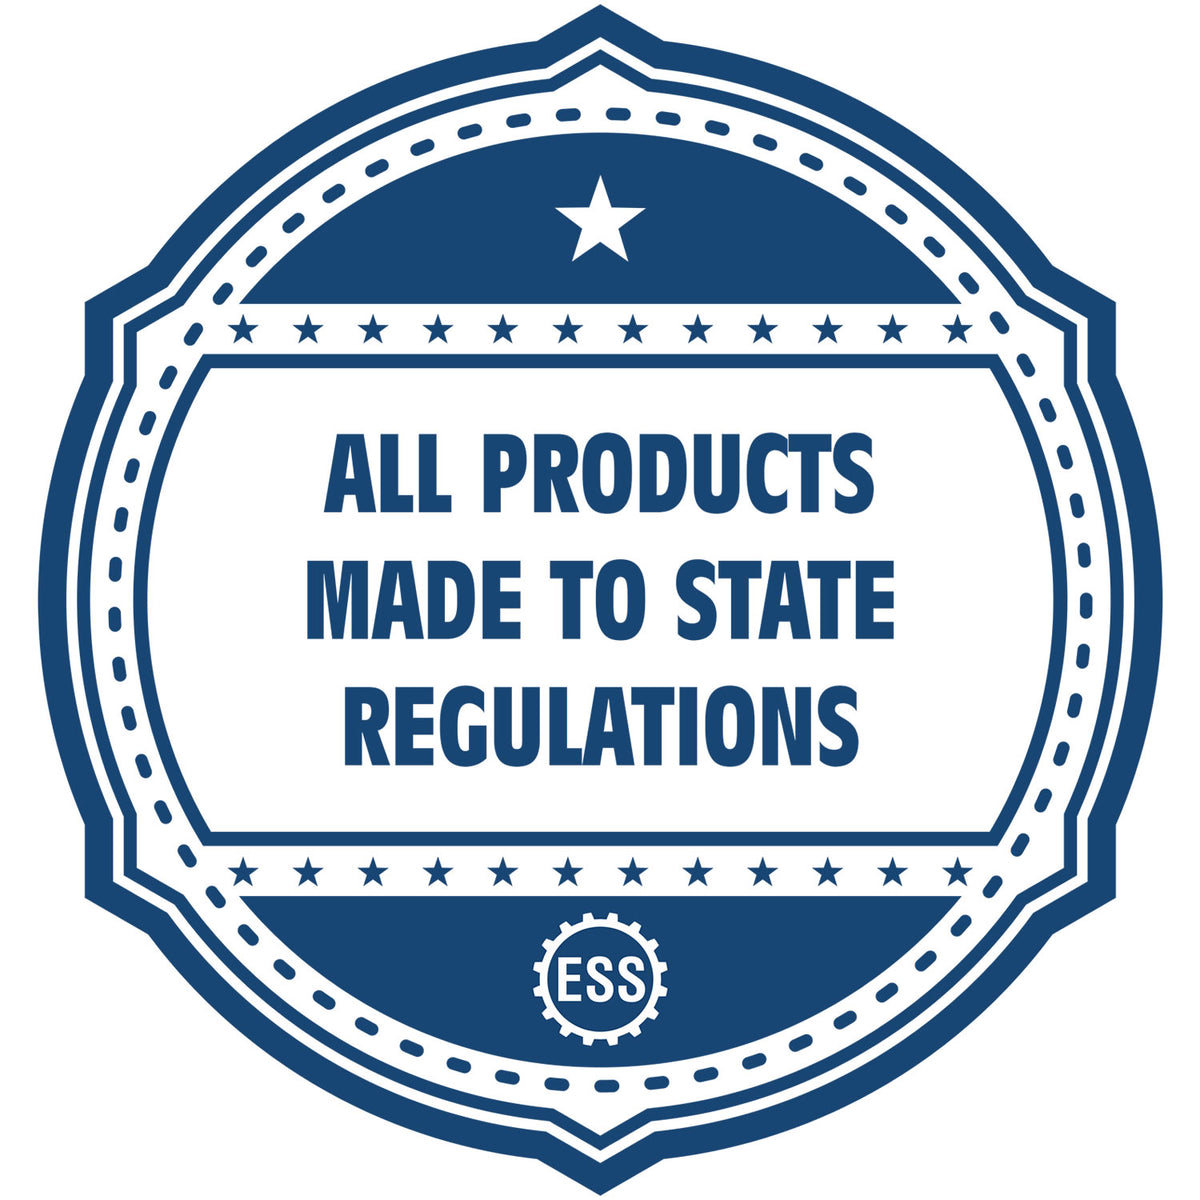 A blue icon or badge for the Heavy Duty Cast Iron Maryland Geologist Seal Embosser showing that this product is made in compliance with state regulations.